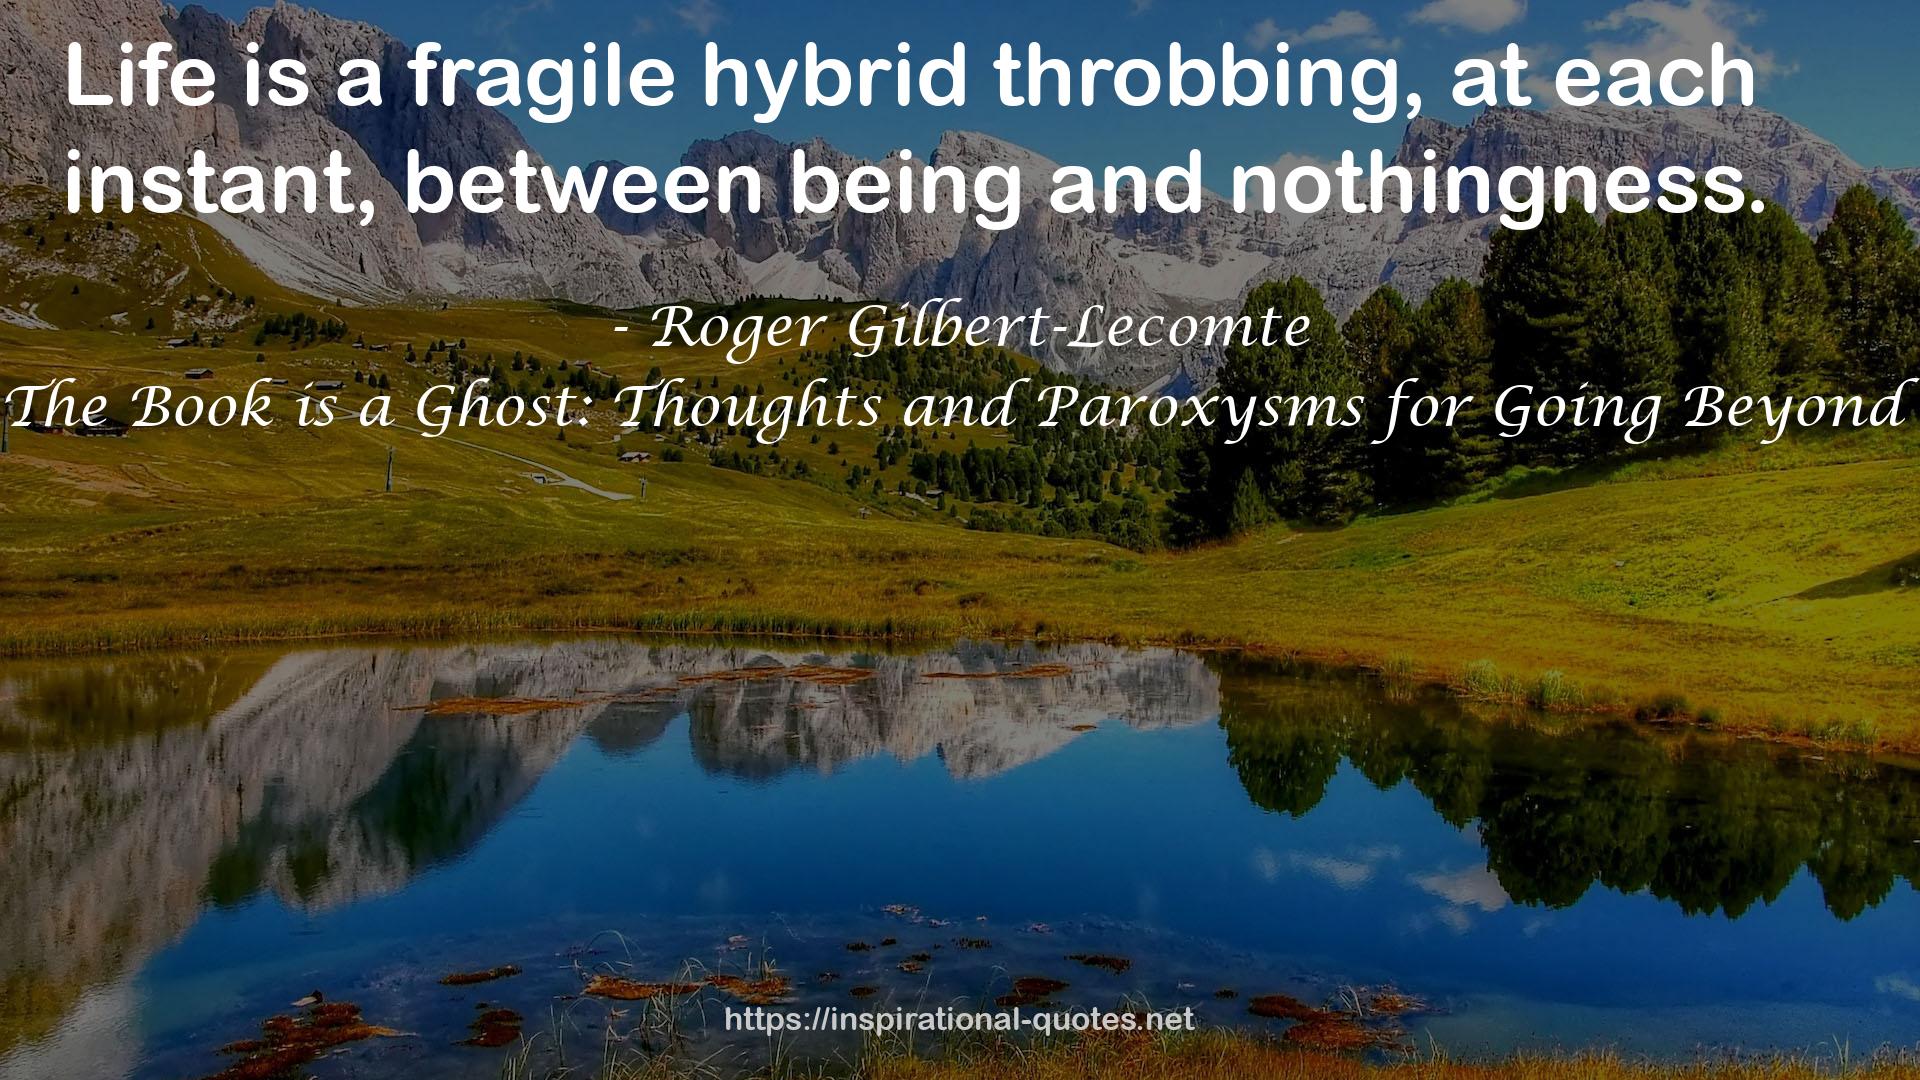 The Book is a Ghost: Thoughts and Paroxysms for Going Beyond QUOTES